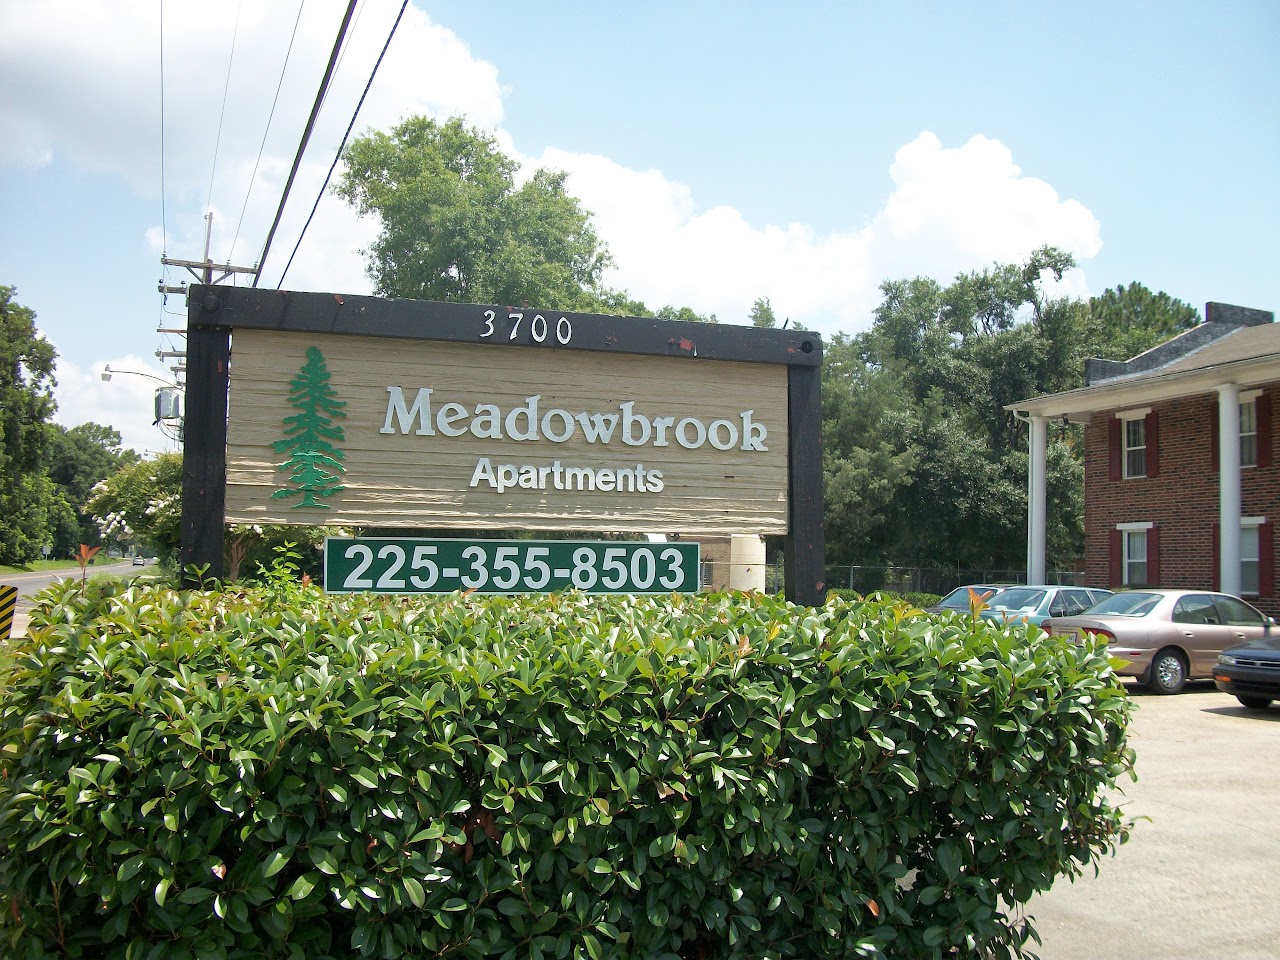 Photo of MEADOWBROOK APARTMENTS. Affordable housing located at 3700 EAST BROOKSTOWN DR. BATON ROUGE, LA 70805